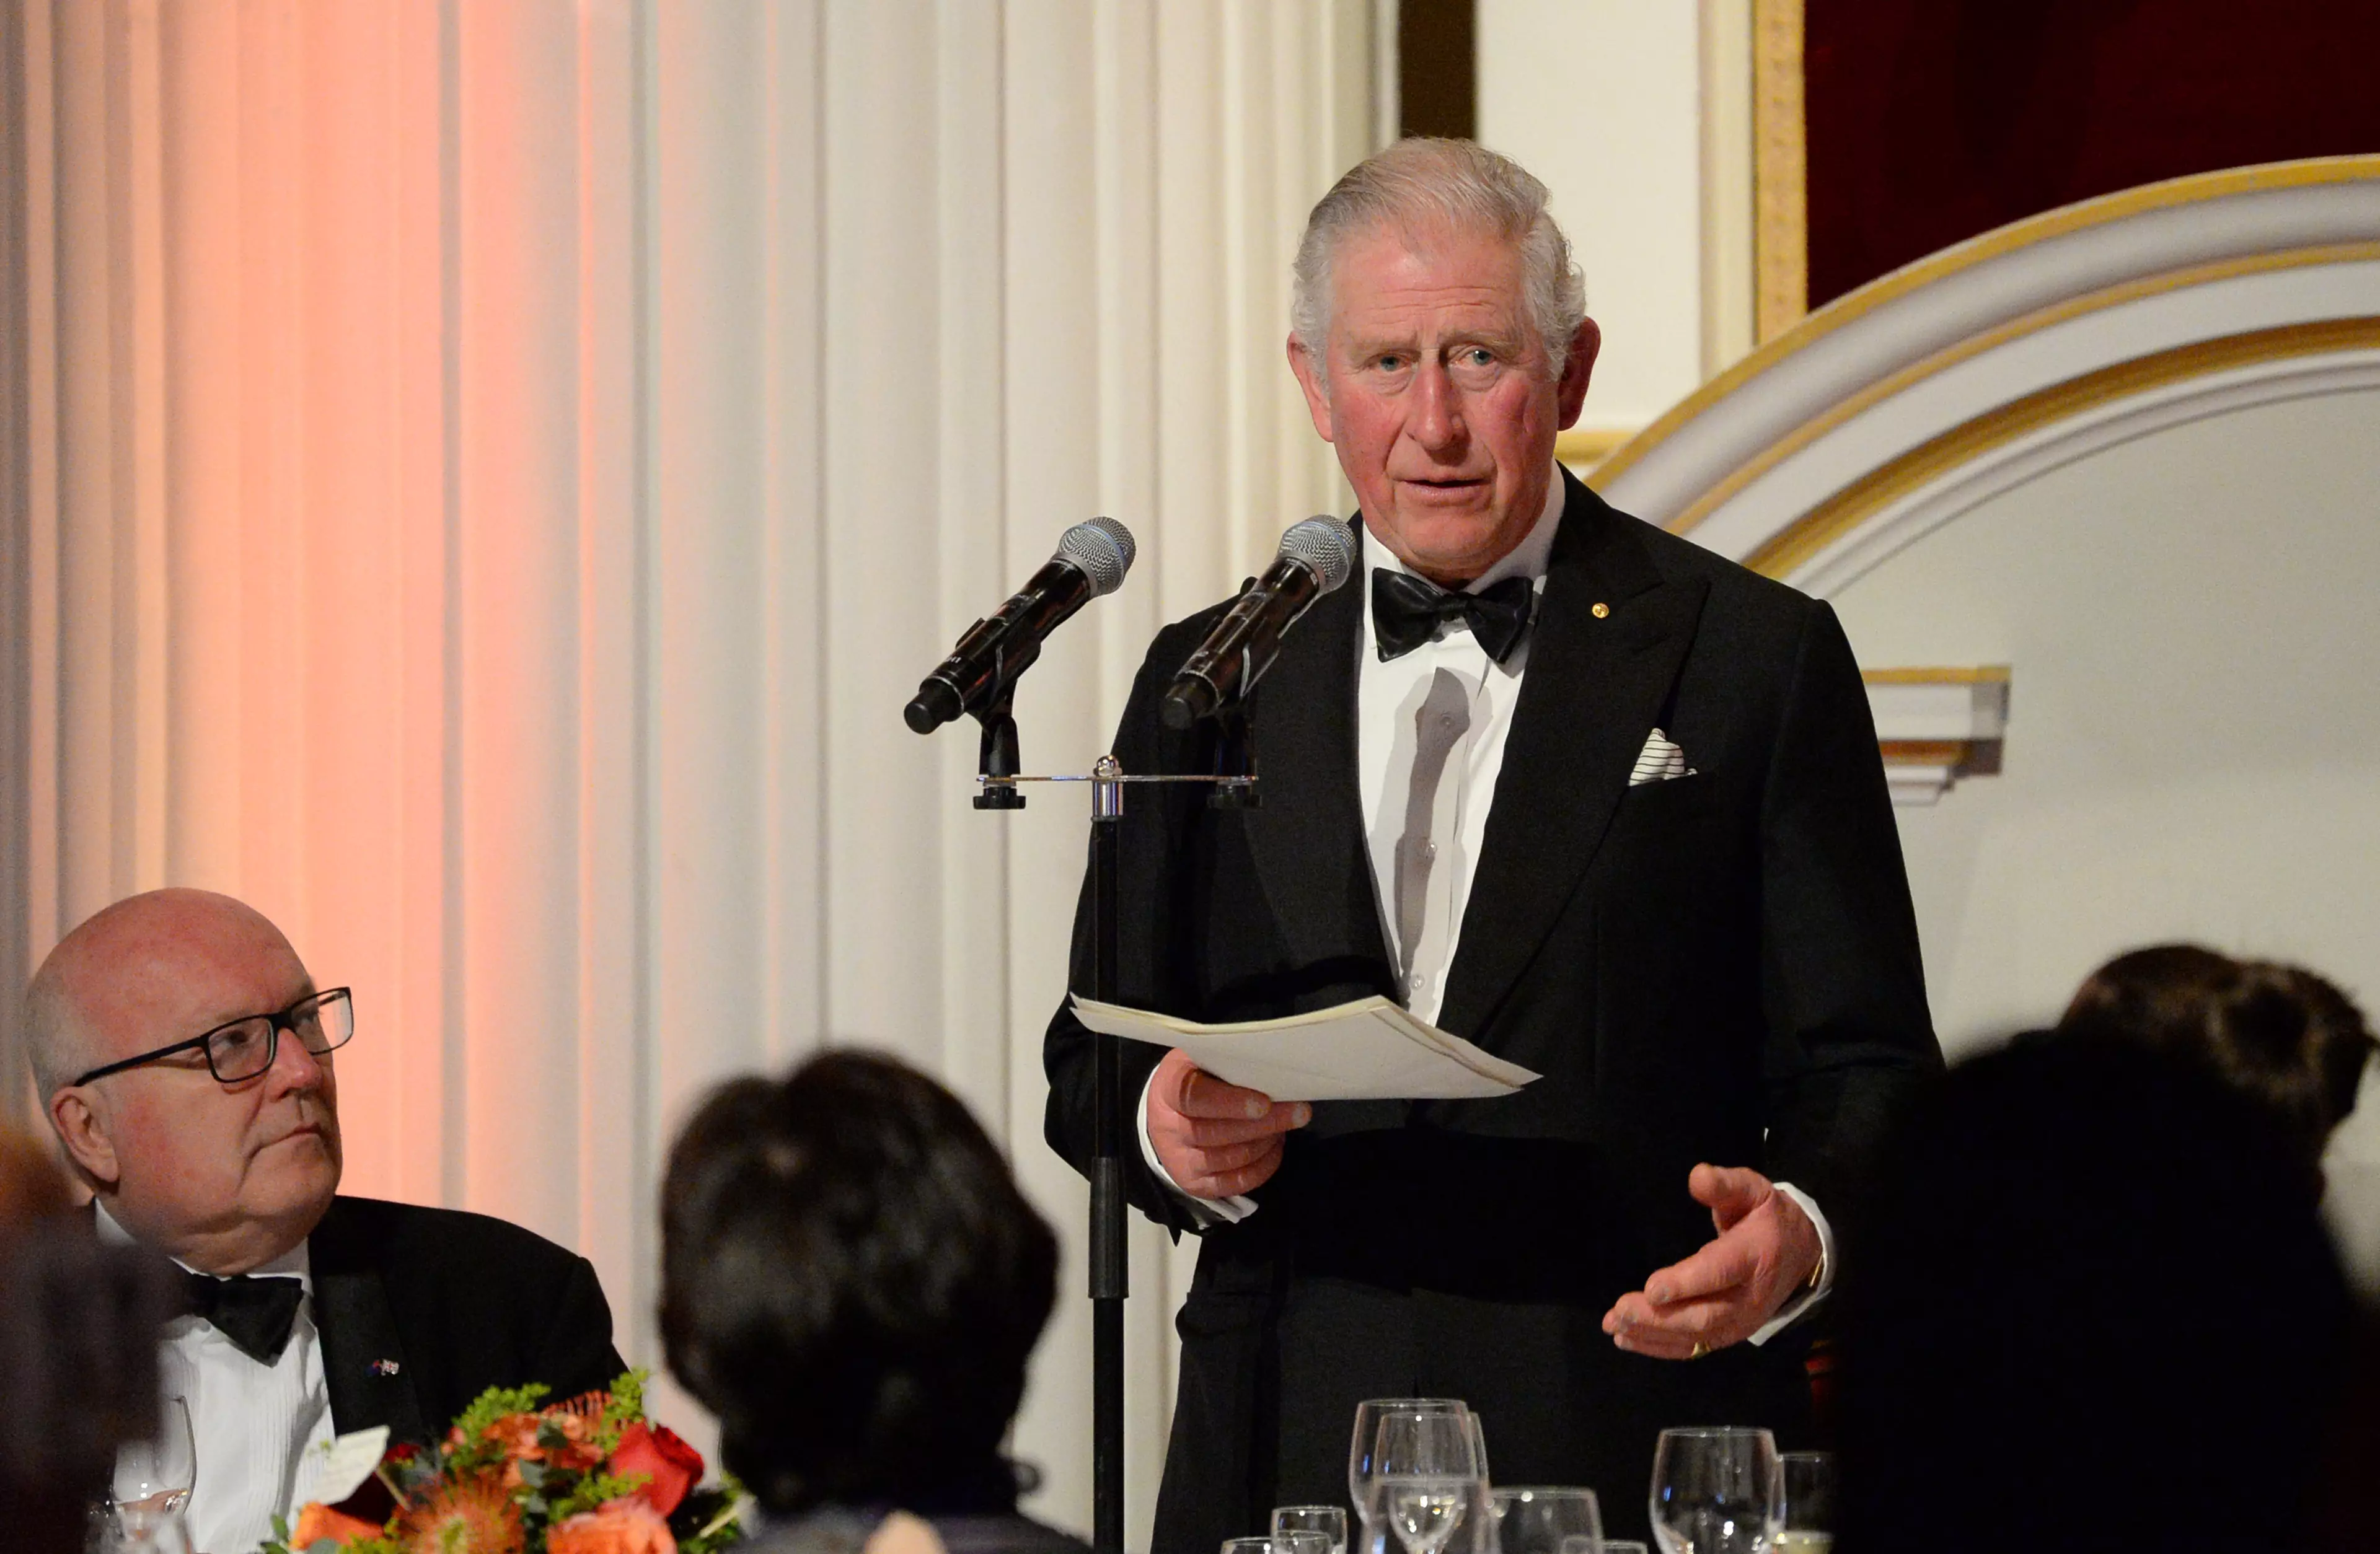 Prince Charles at a public engagement earlier this month.